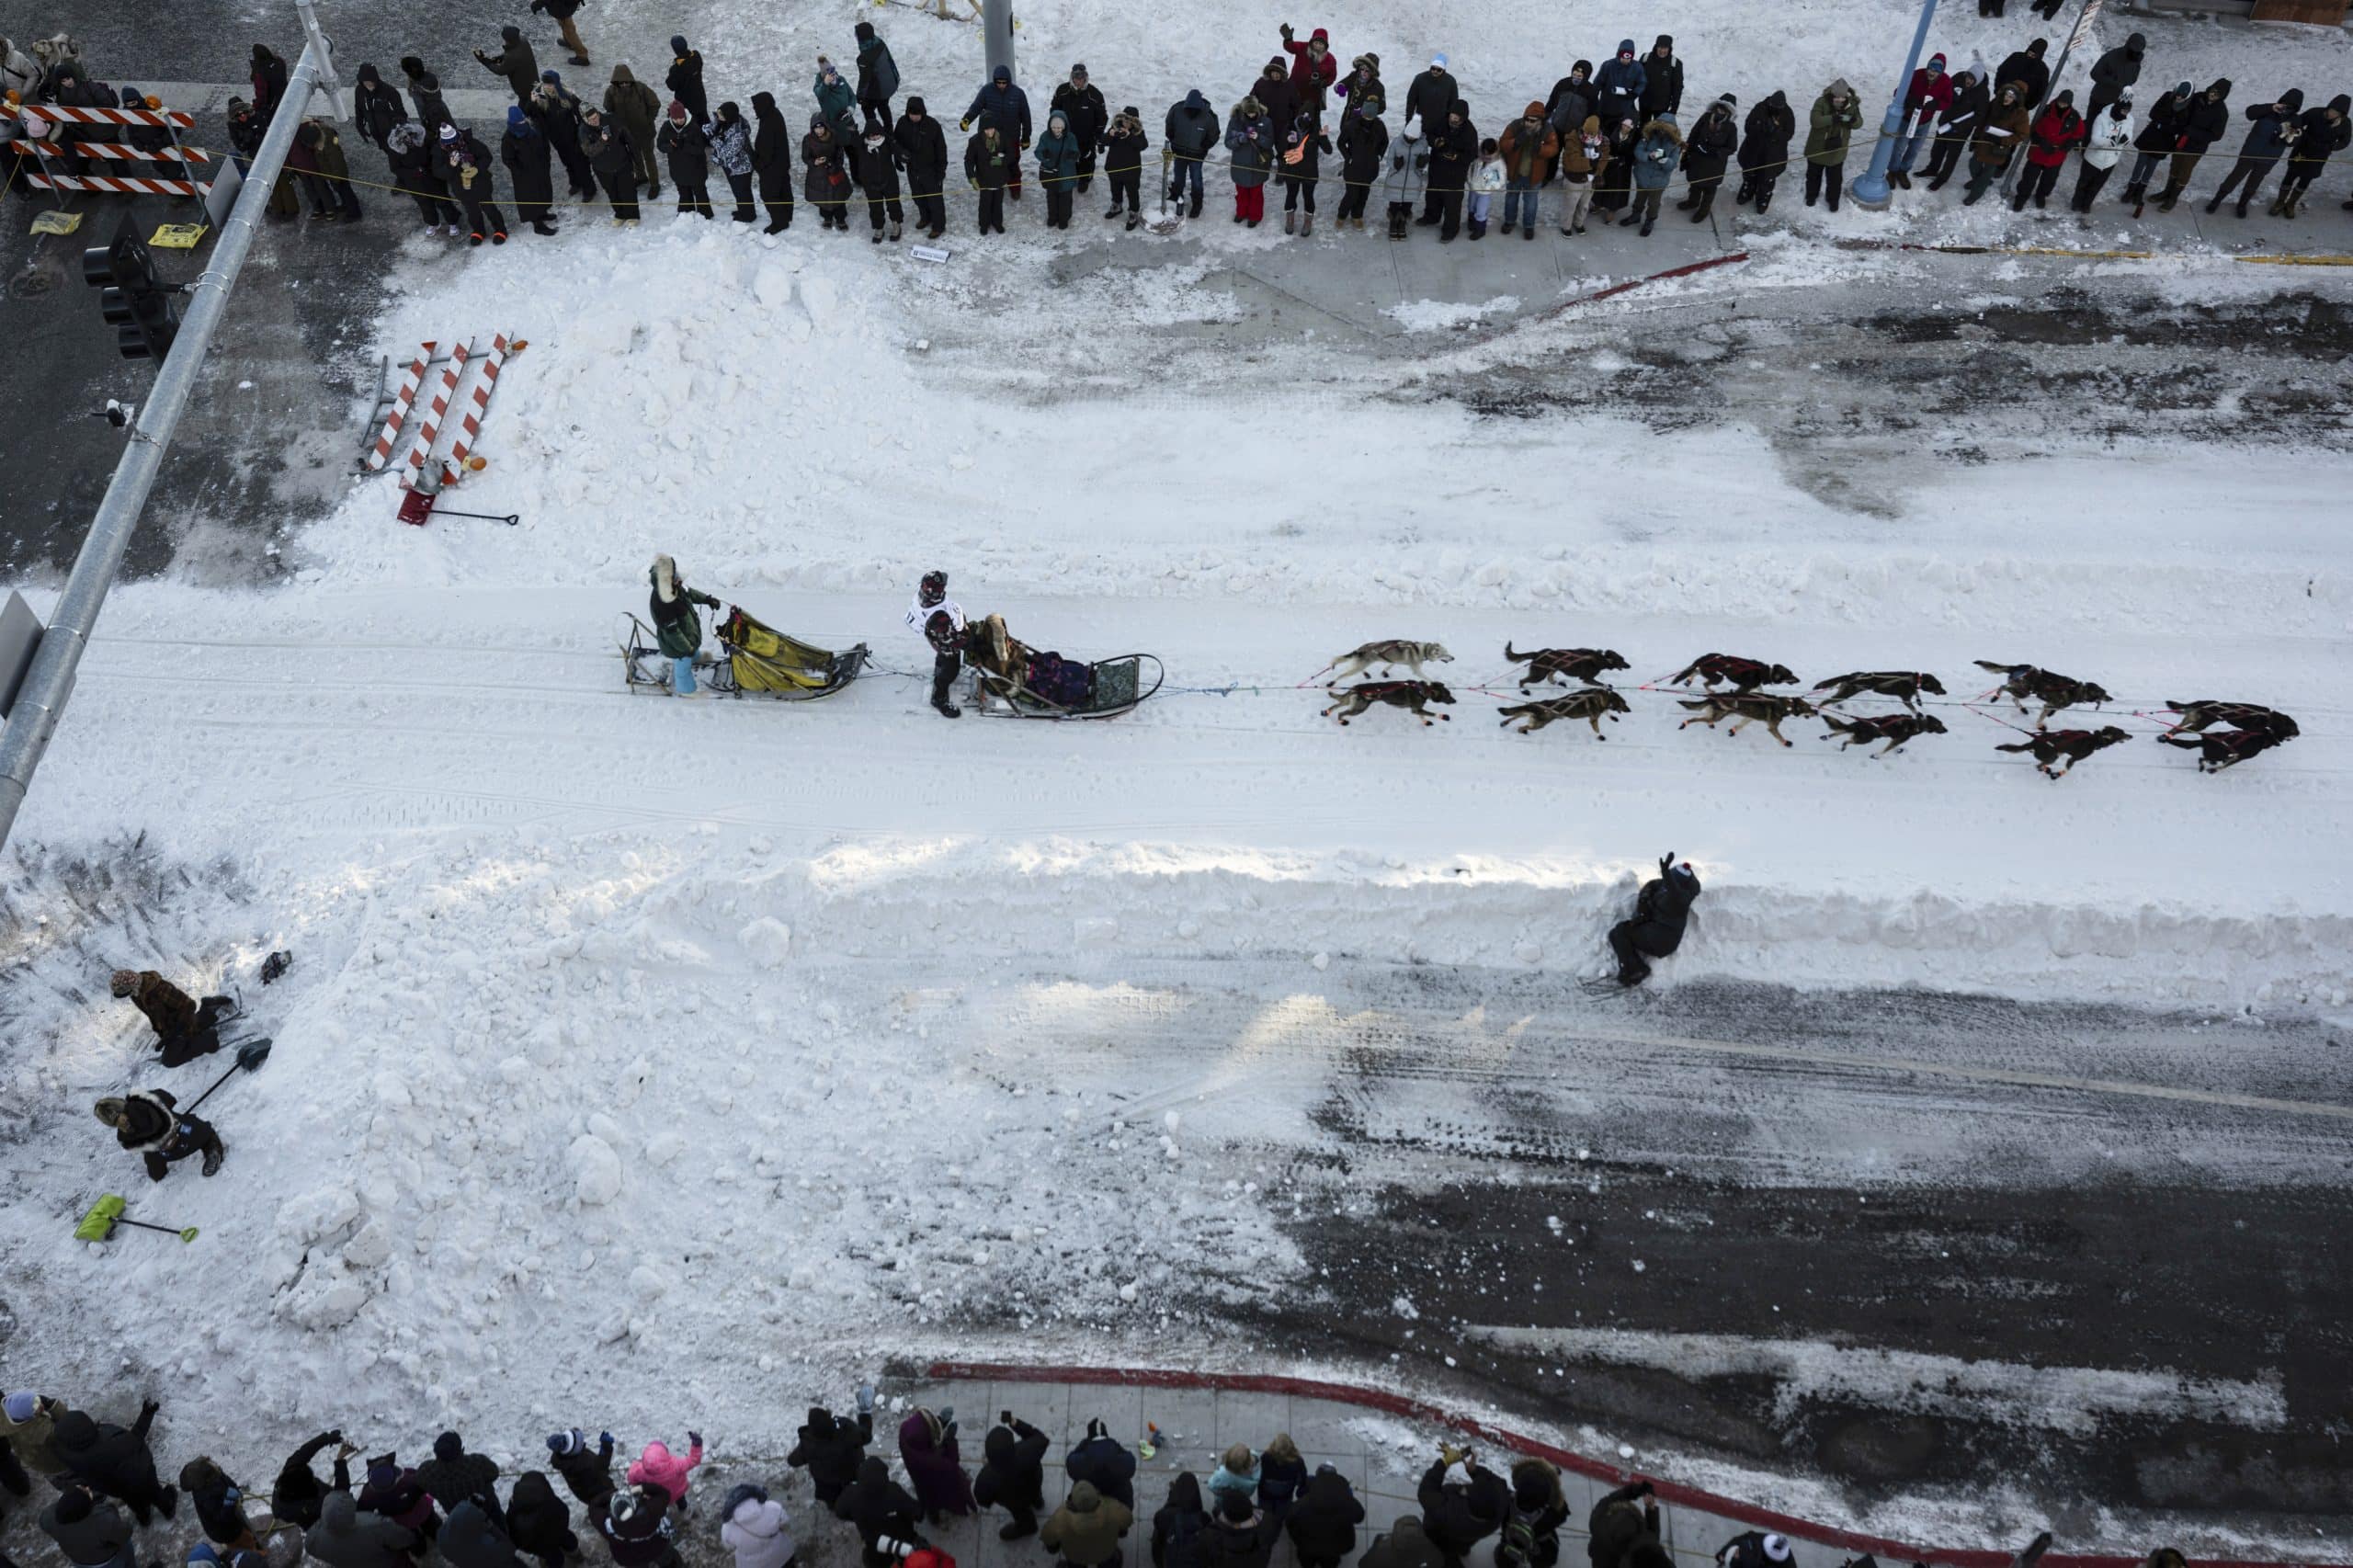 Dog deaths revive calls for end to Iditarod, the endurance race with